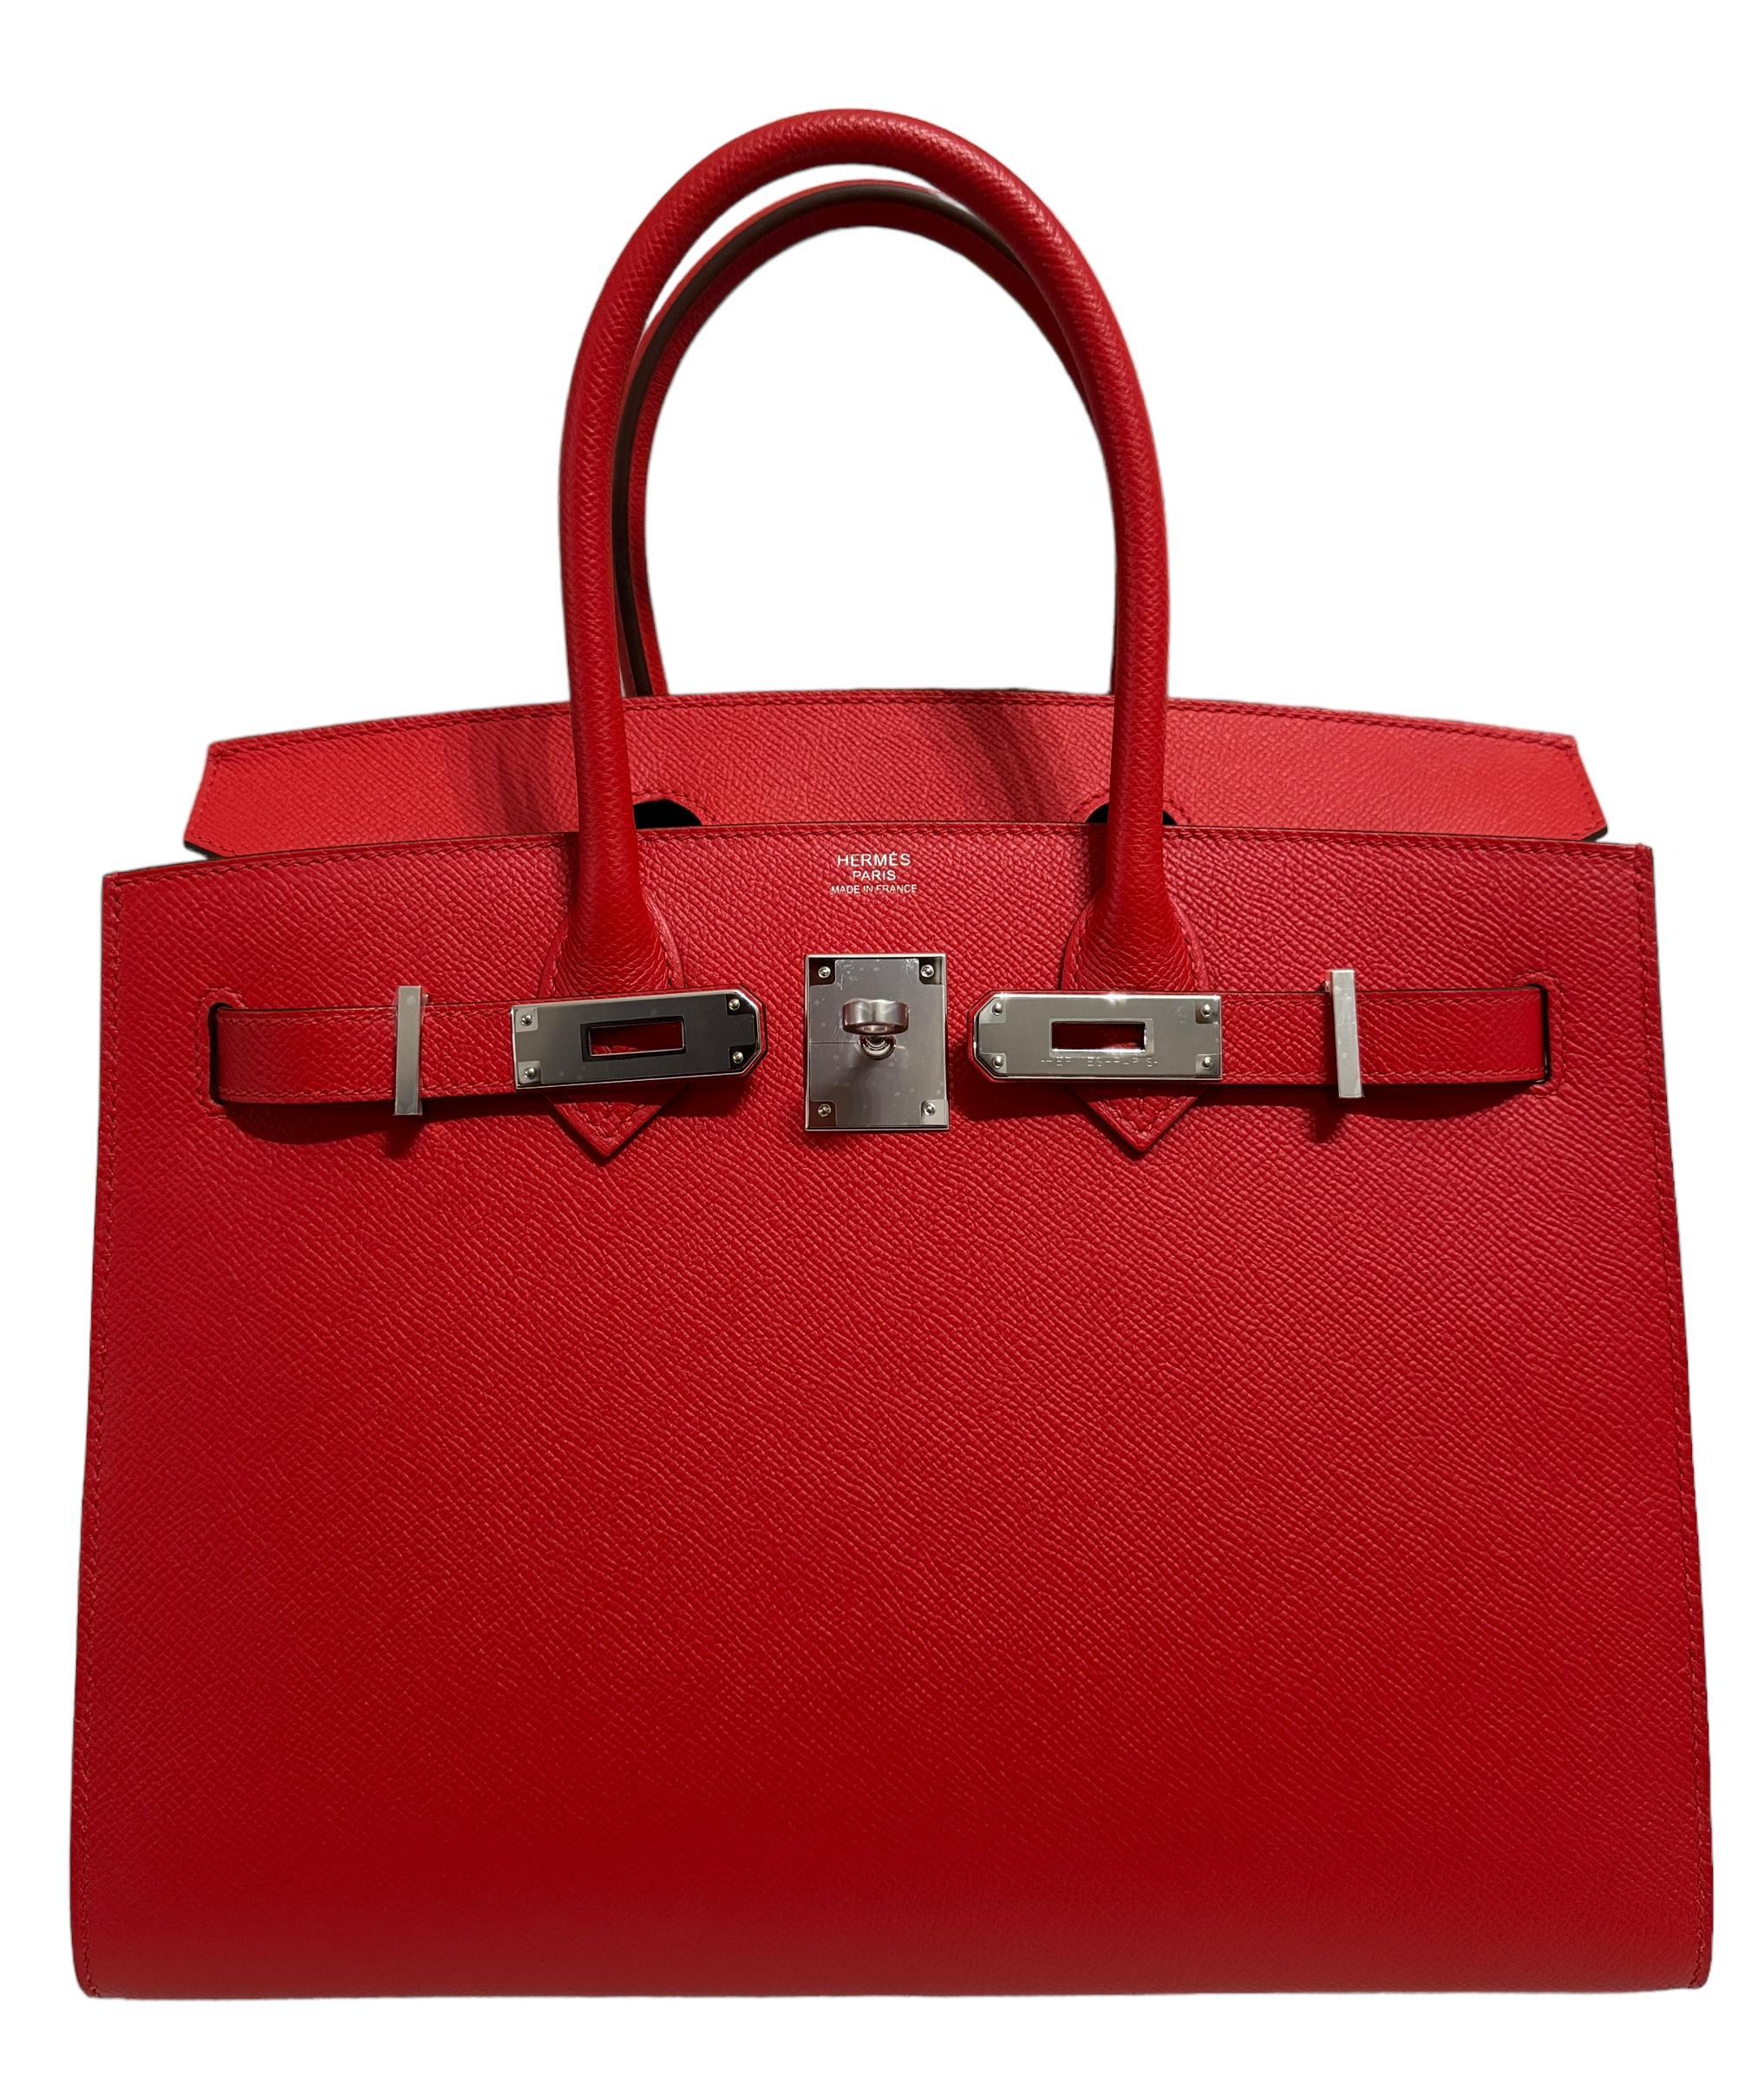 Hermes Birkin 30 Sellier Rouge de Coeur Red Epsom Leather Palladium Hardware In New Condition For Sale In Miami, FL